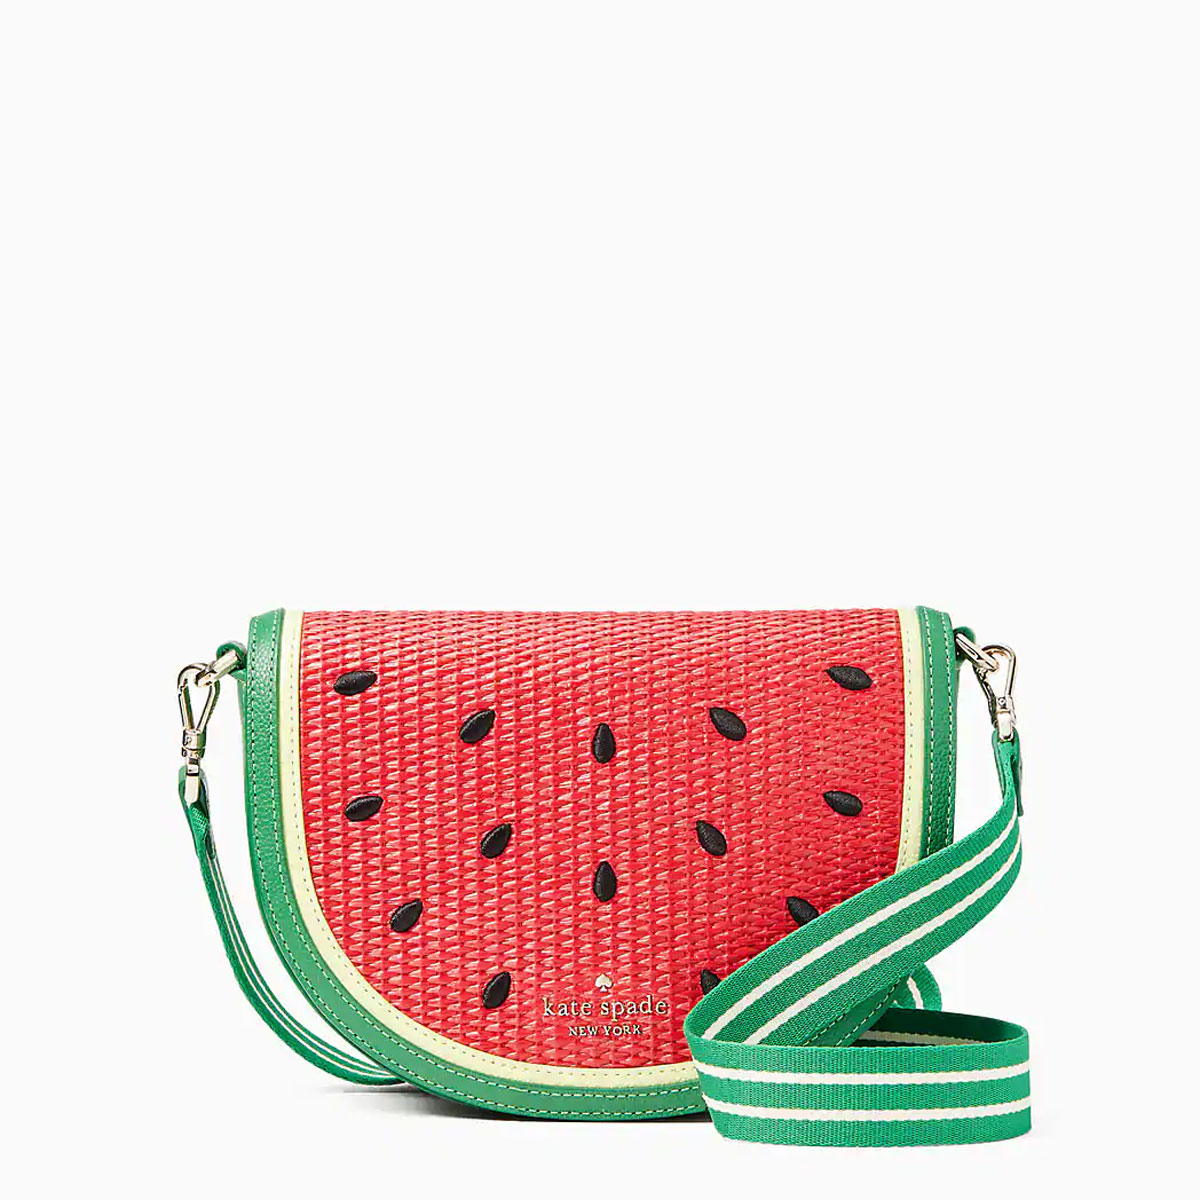 Kate Spade New York Has A Summer Collection Inspired By Fruits